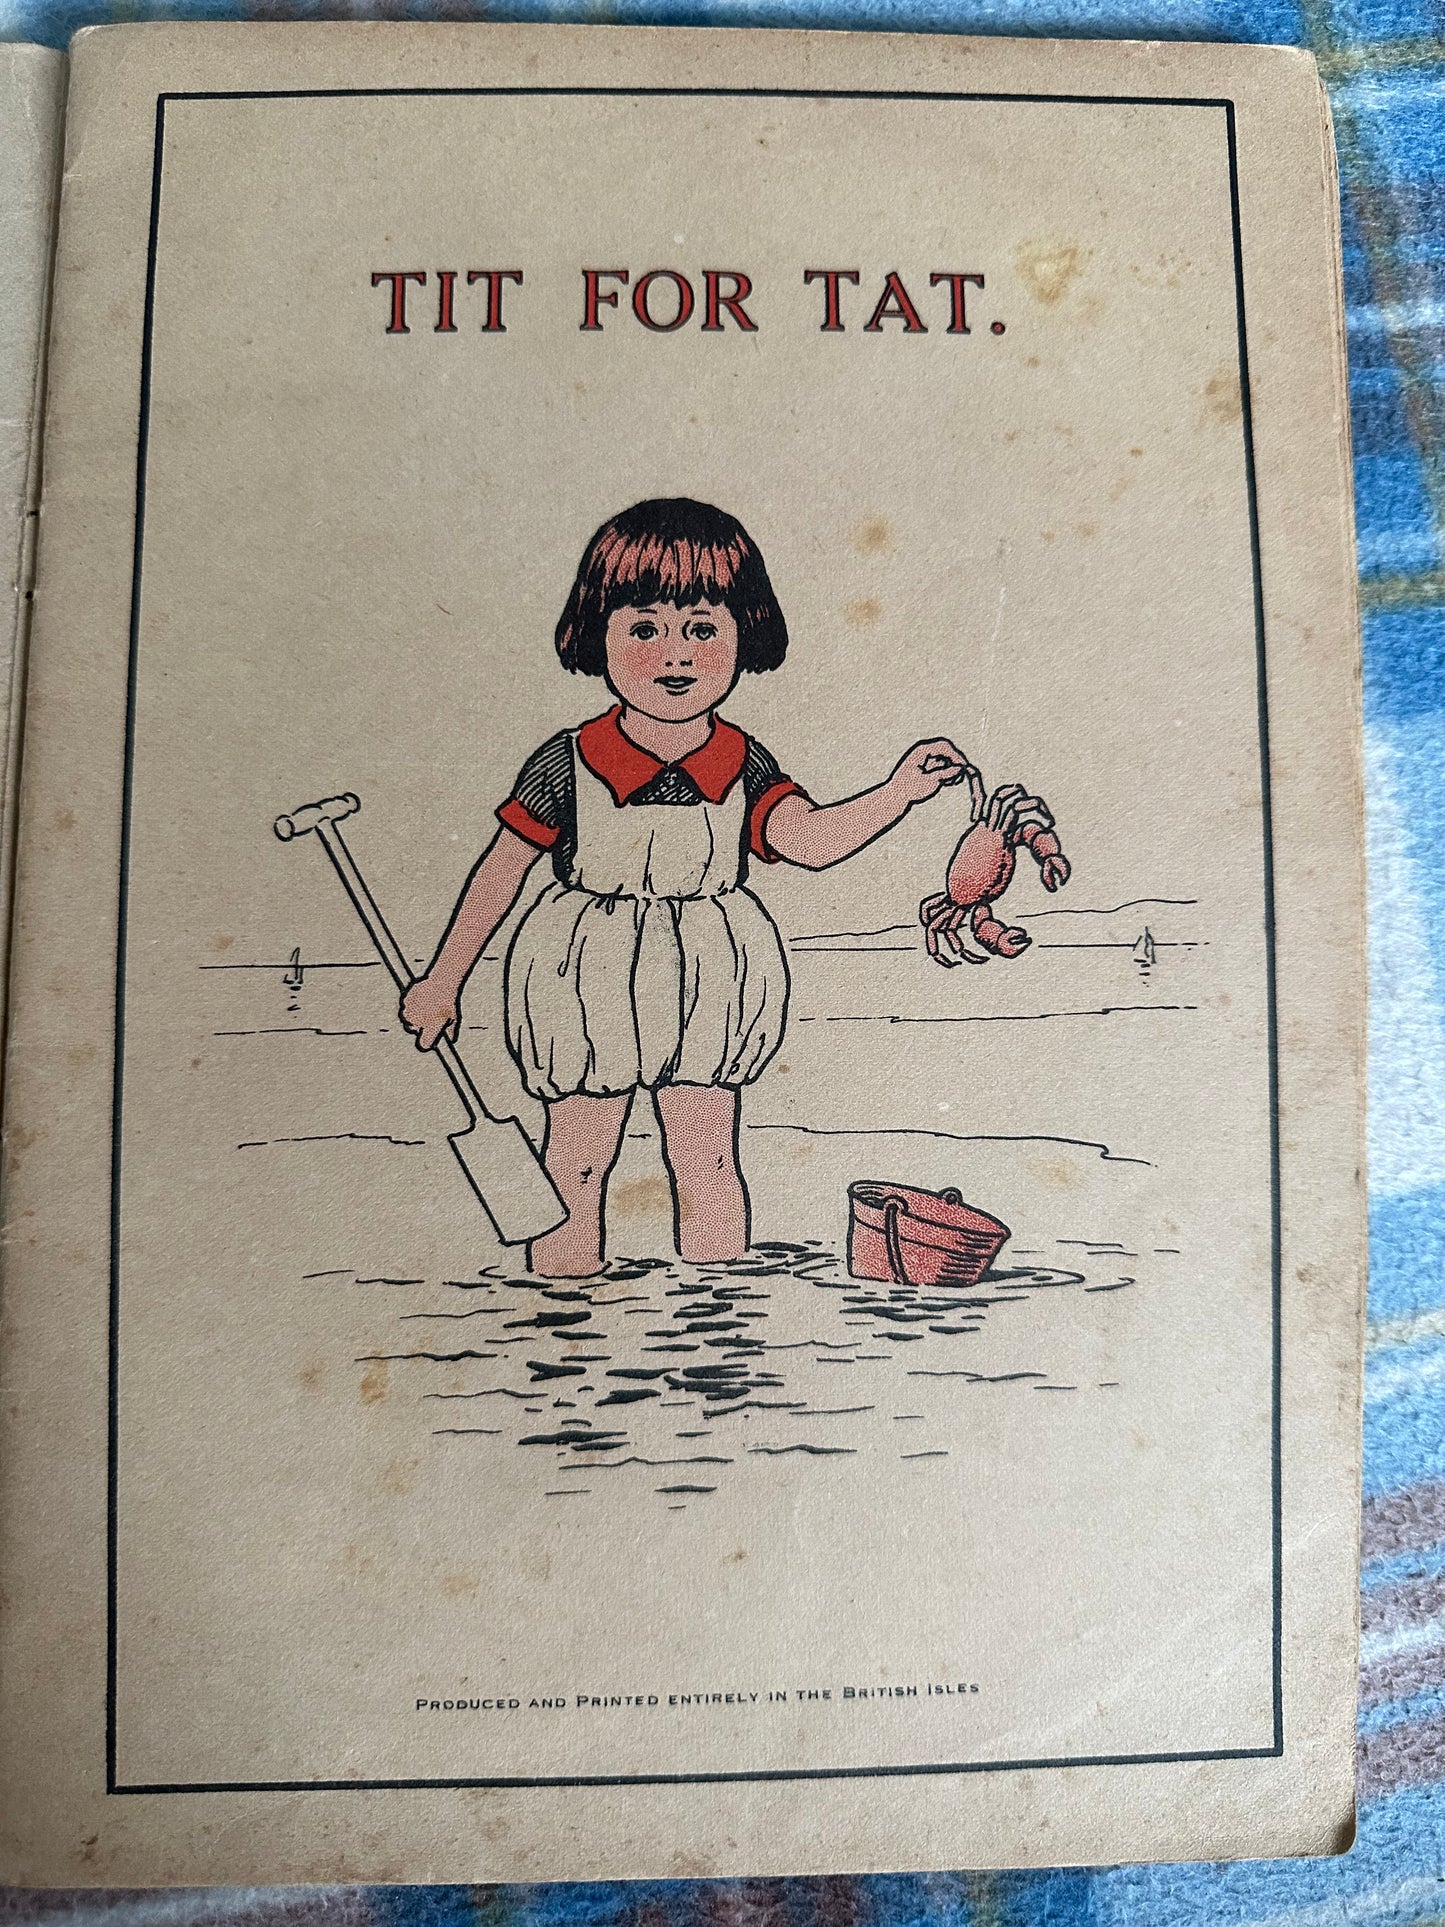 1930’s Tit For Tat (Printed in the British Isles)